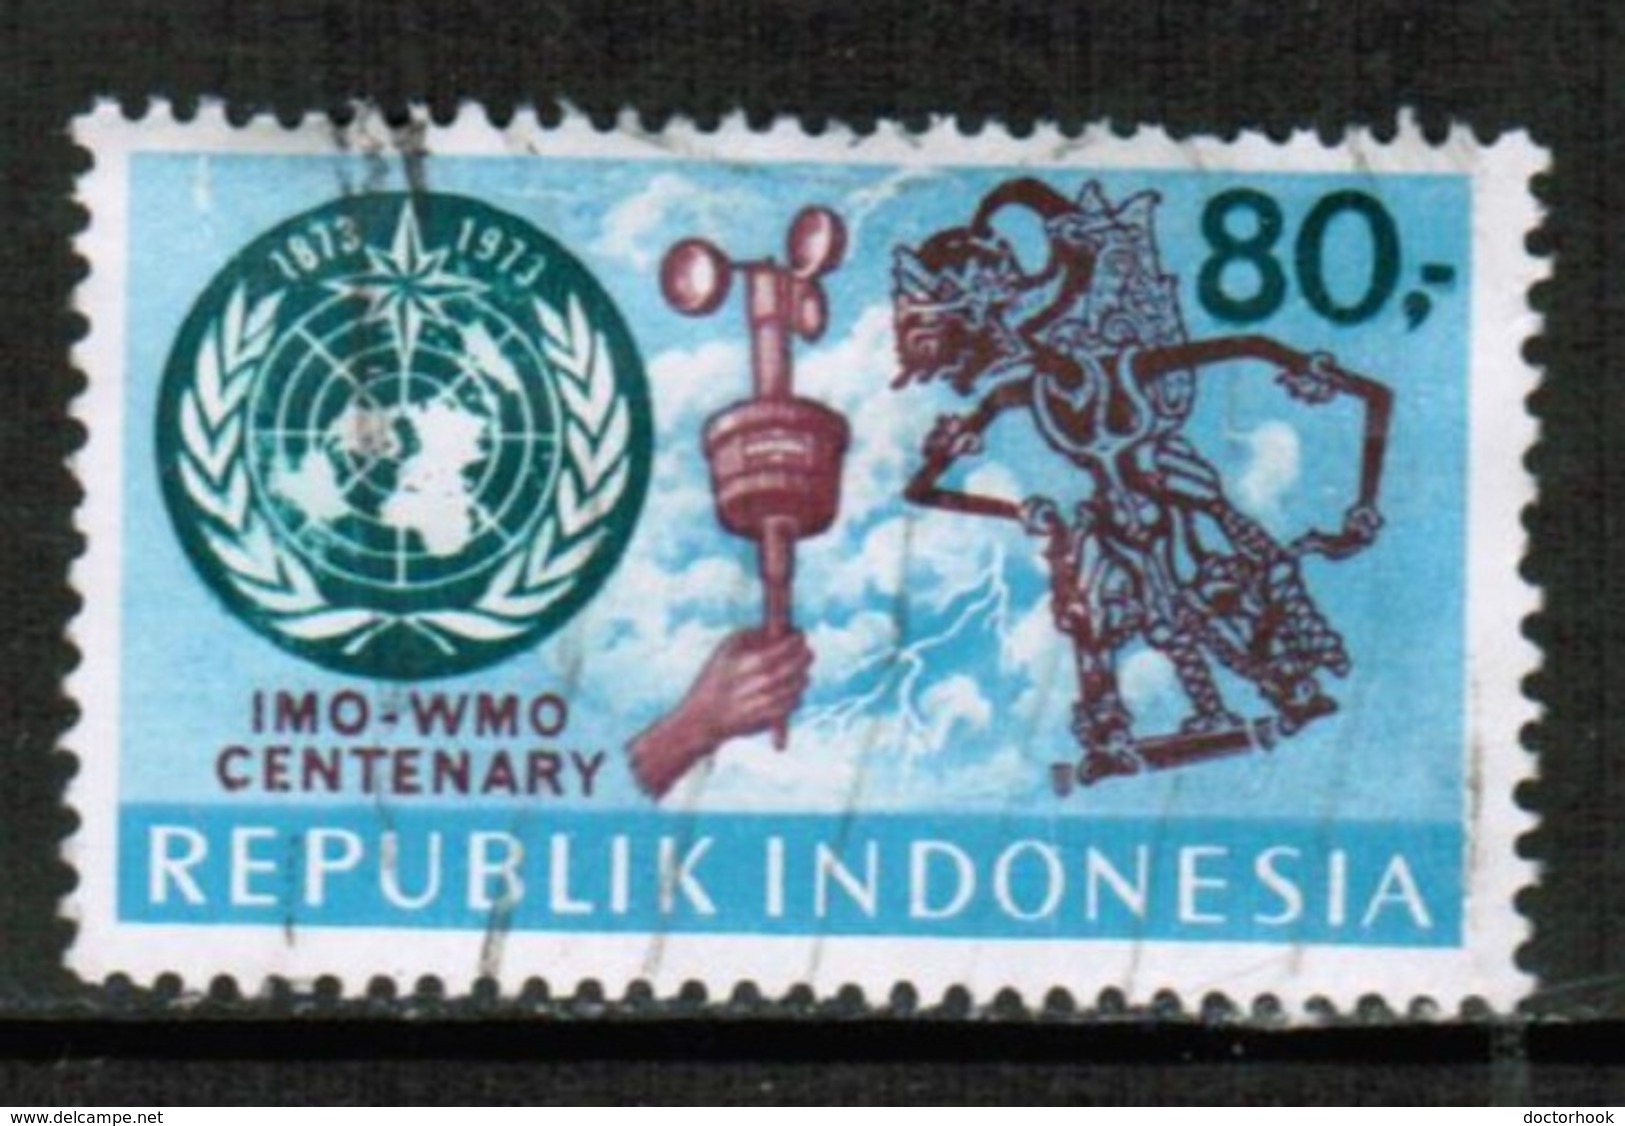 INDONESIA   Scott # 840 VF USED (Stamp Scan # 432) - Indonesia